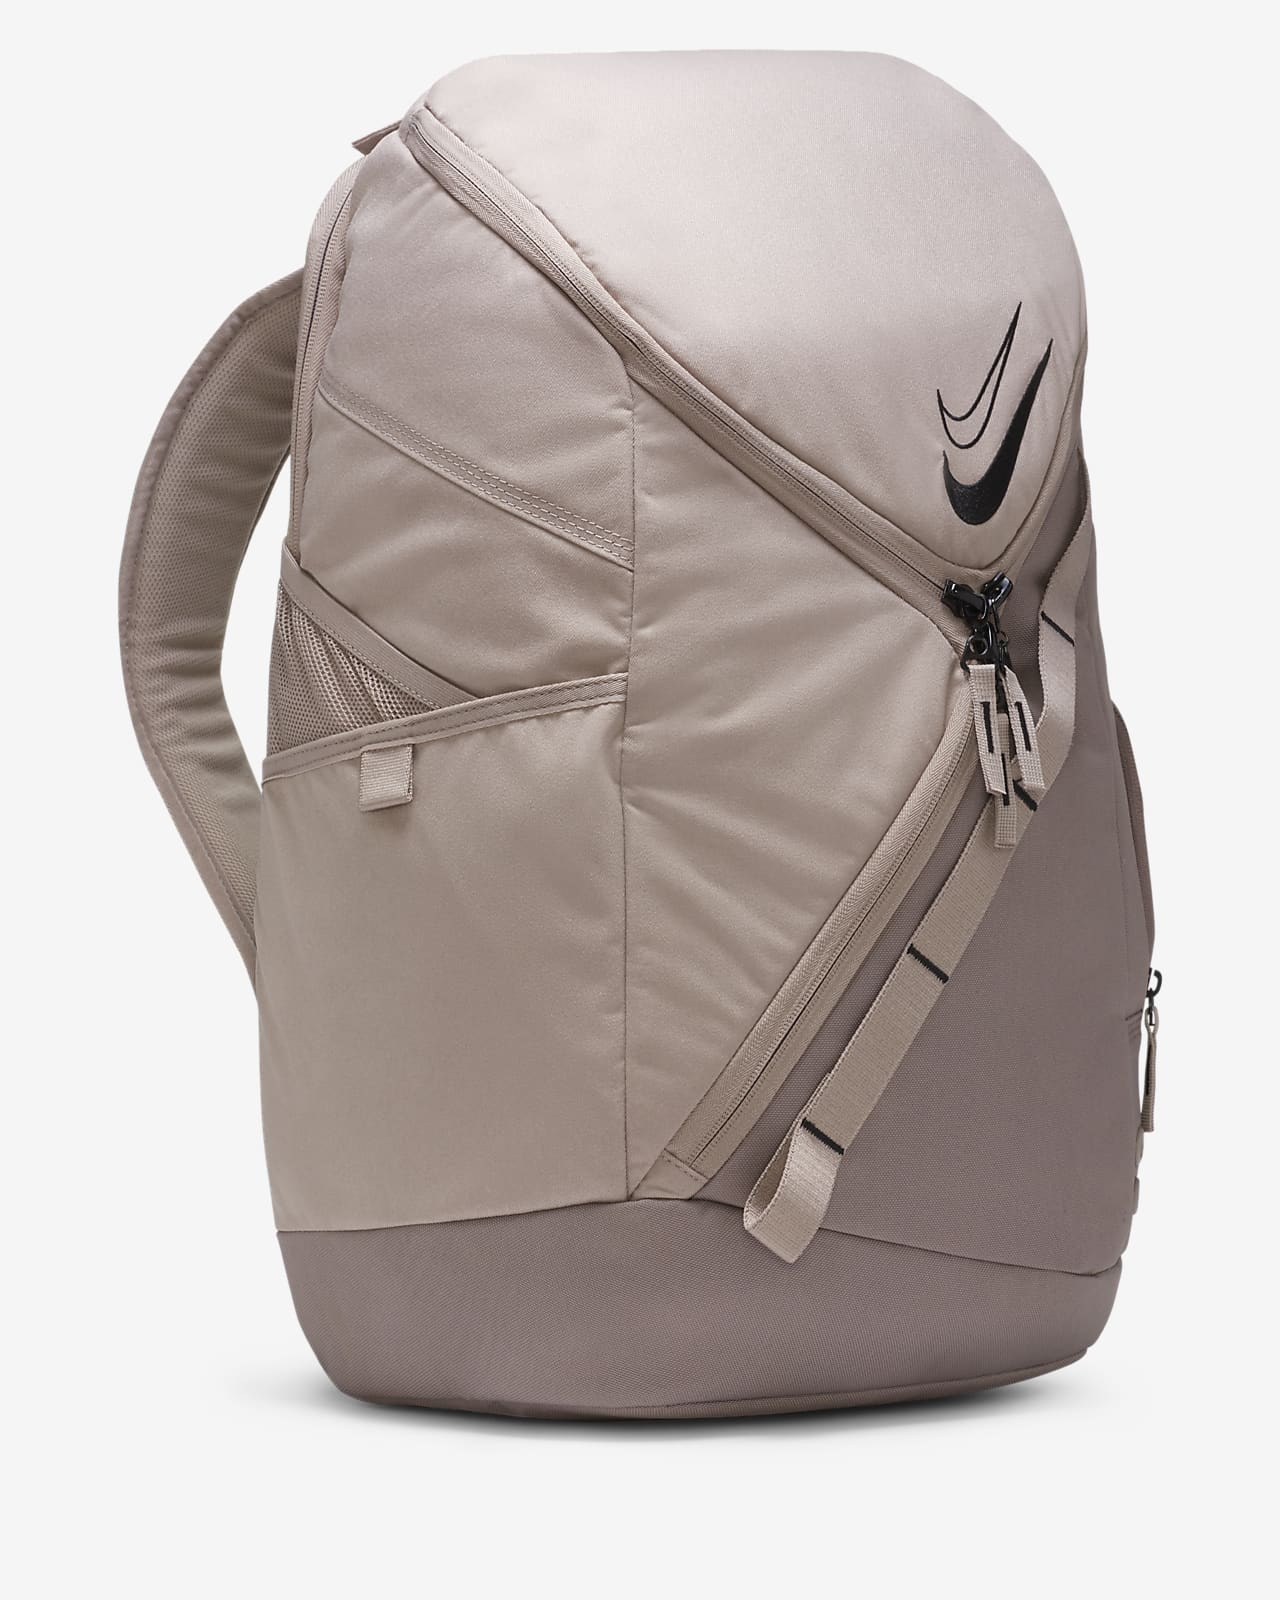 discount kd backpack